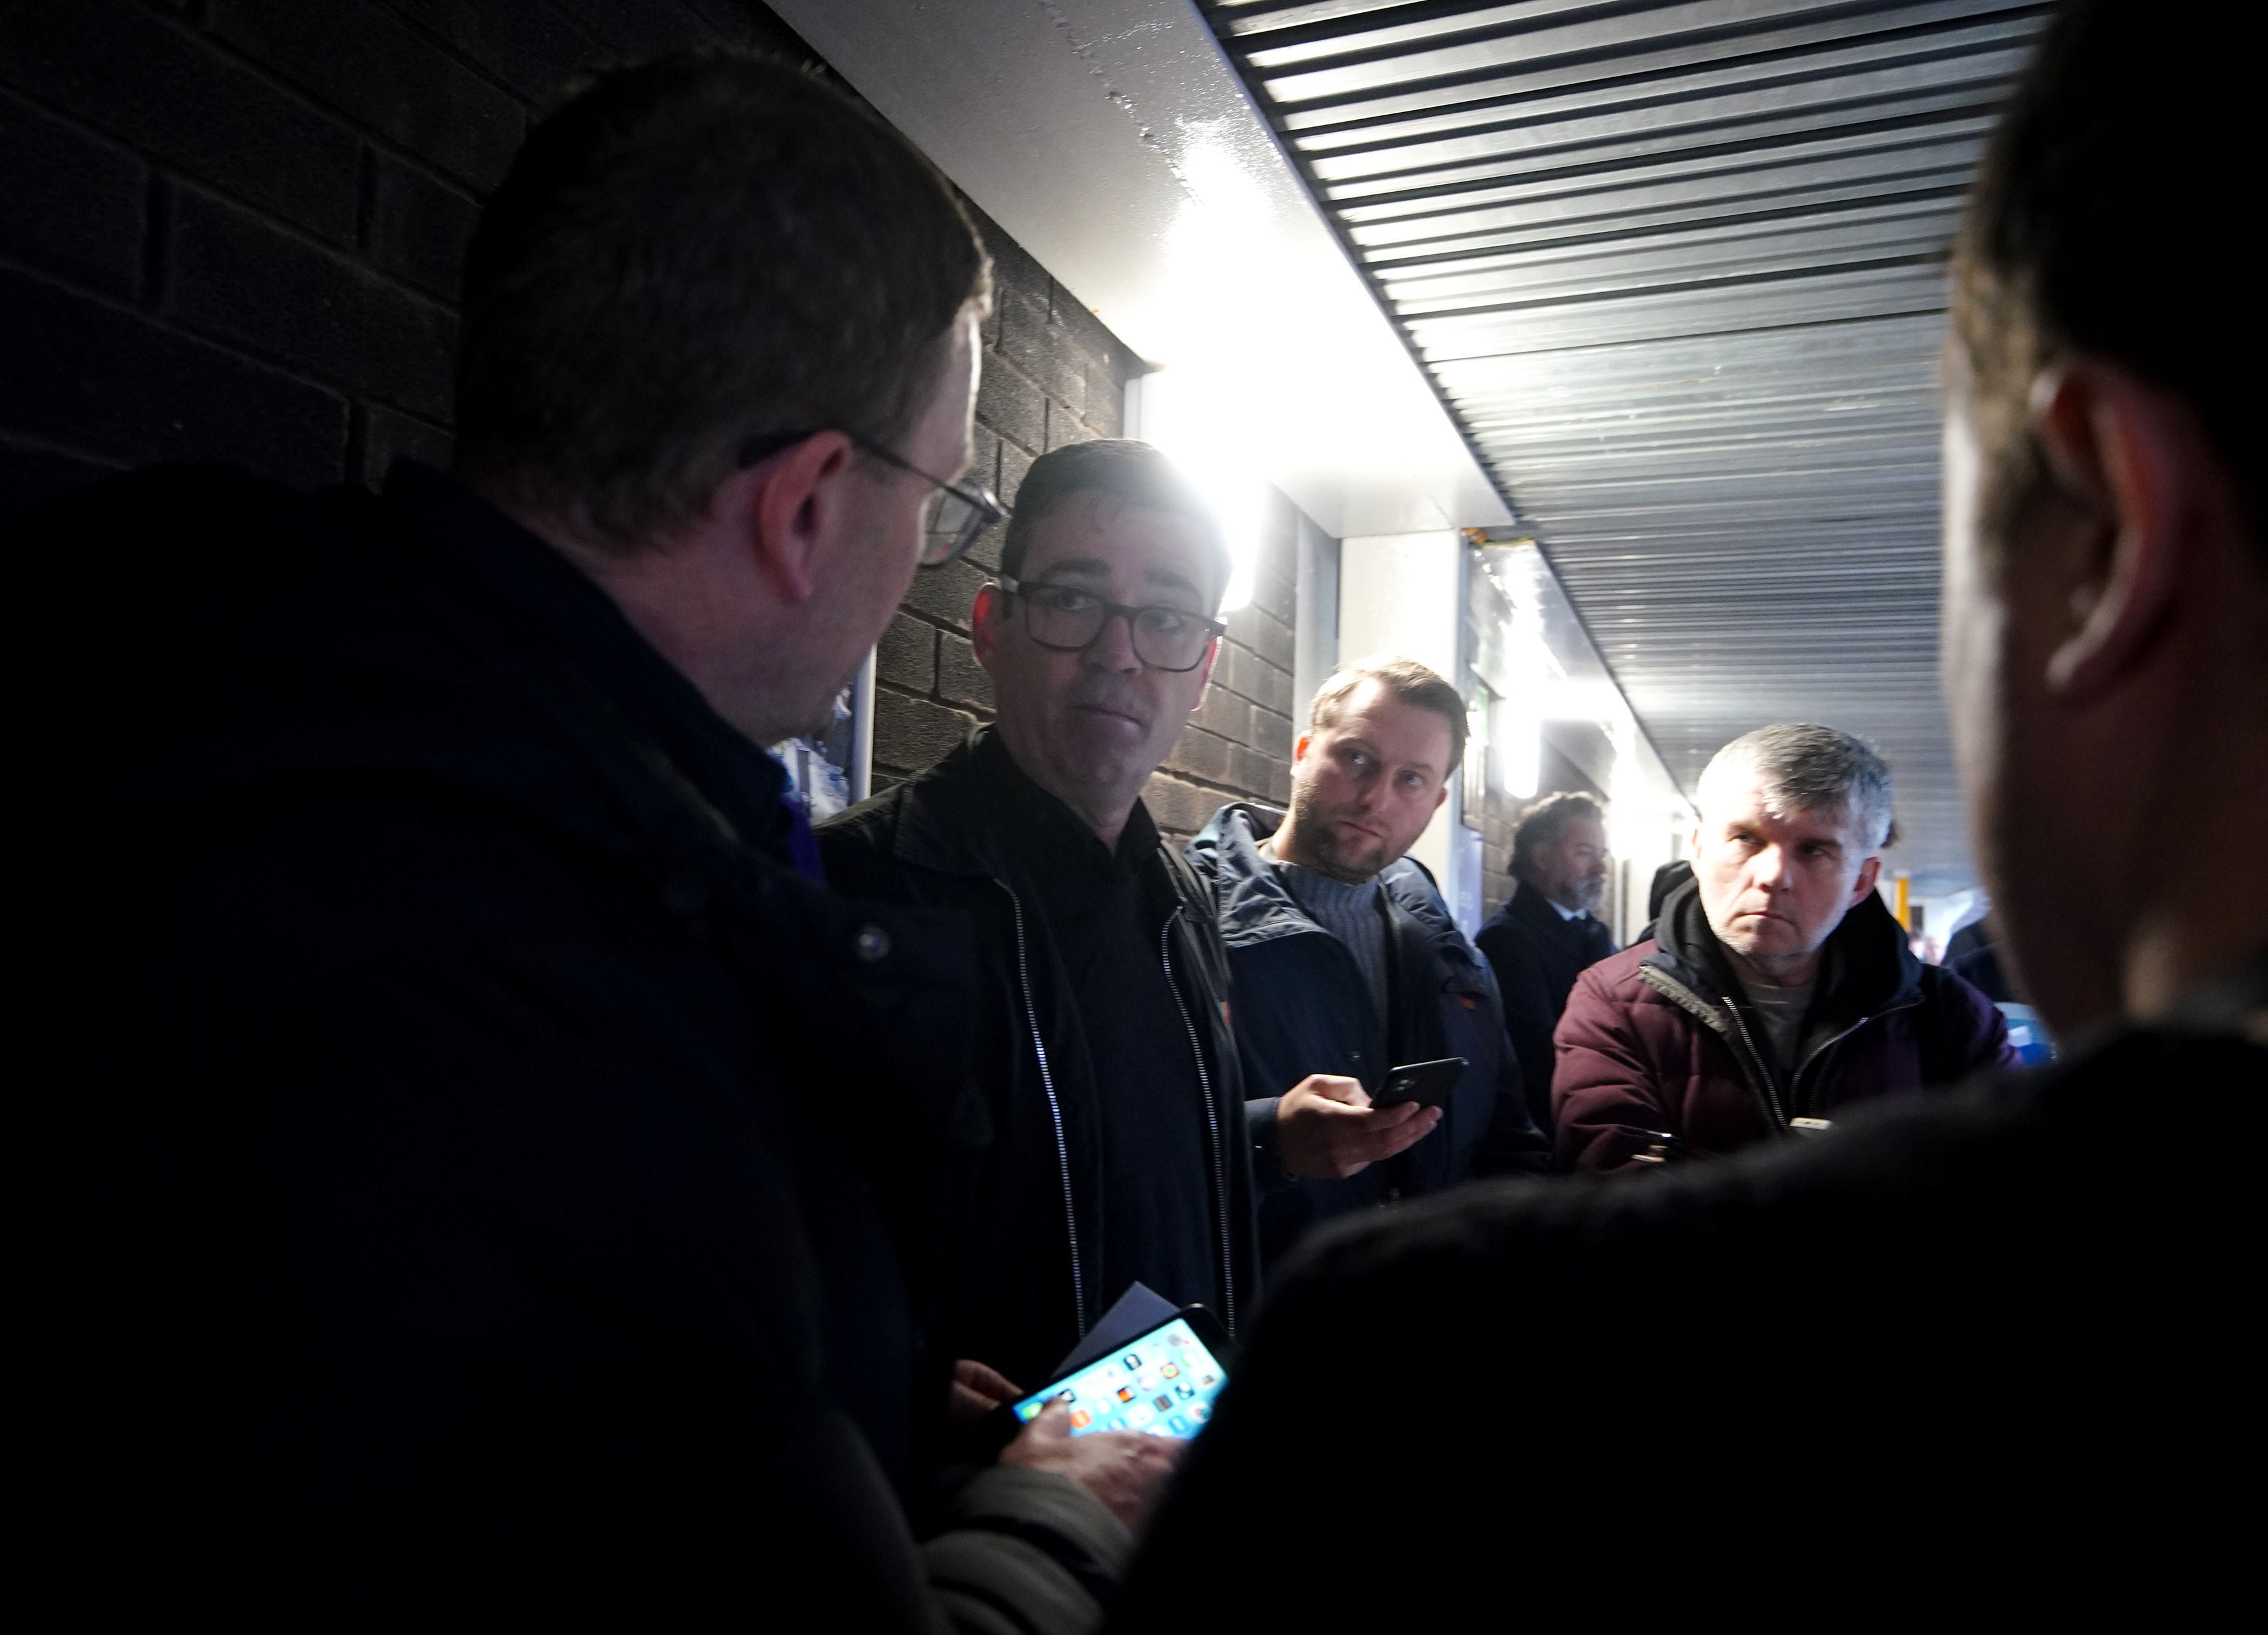 Andy Bunrham spoke to journalists ahead of Everton’s game against Manchester United over the weekend